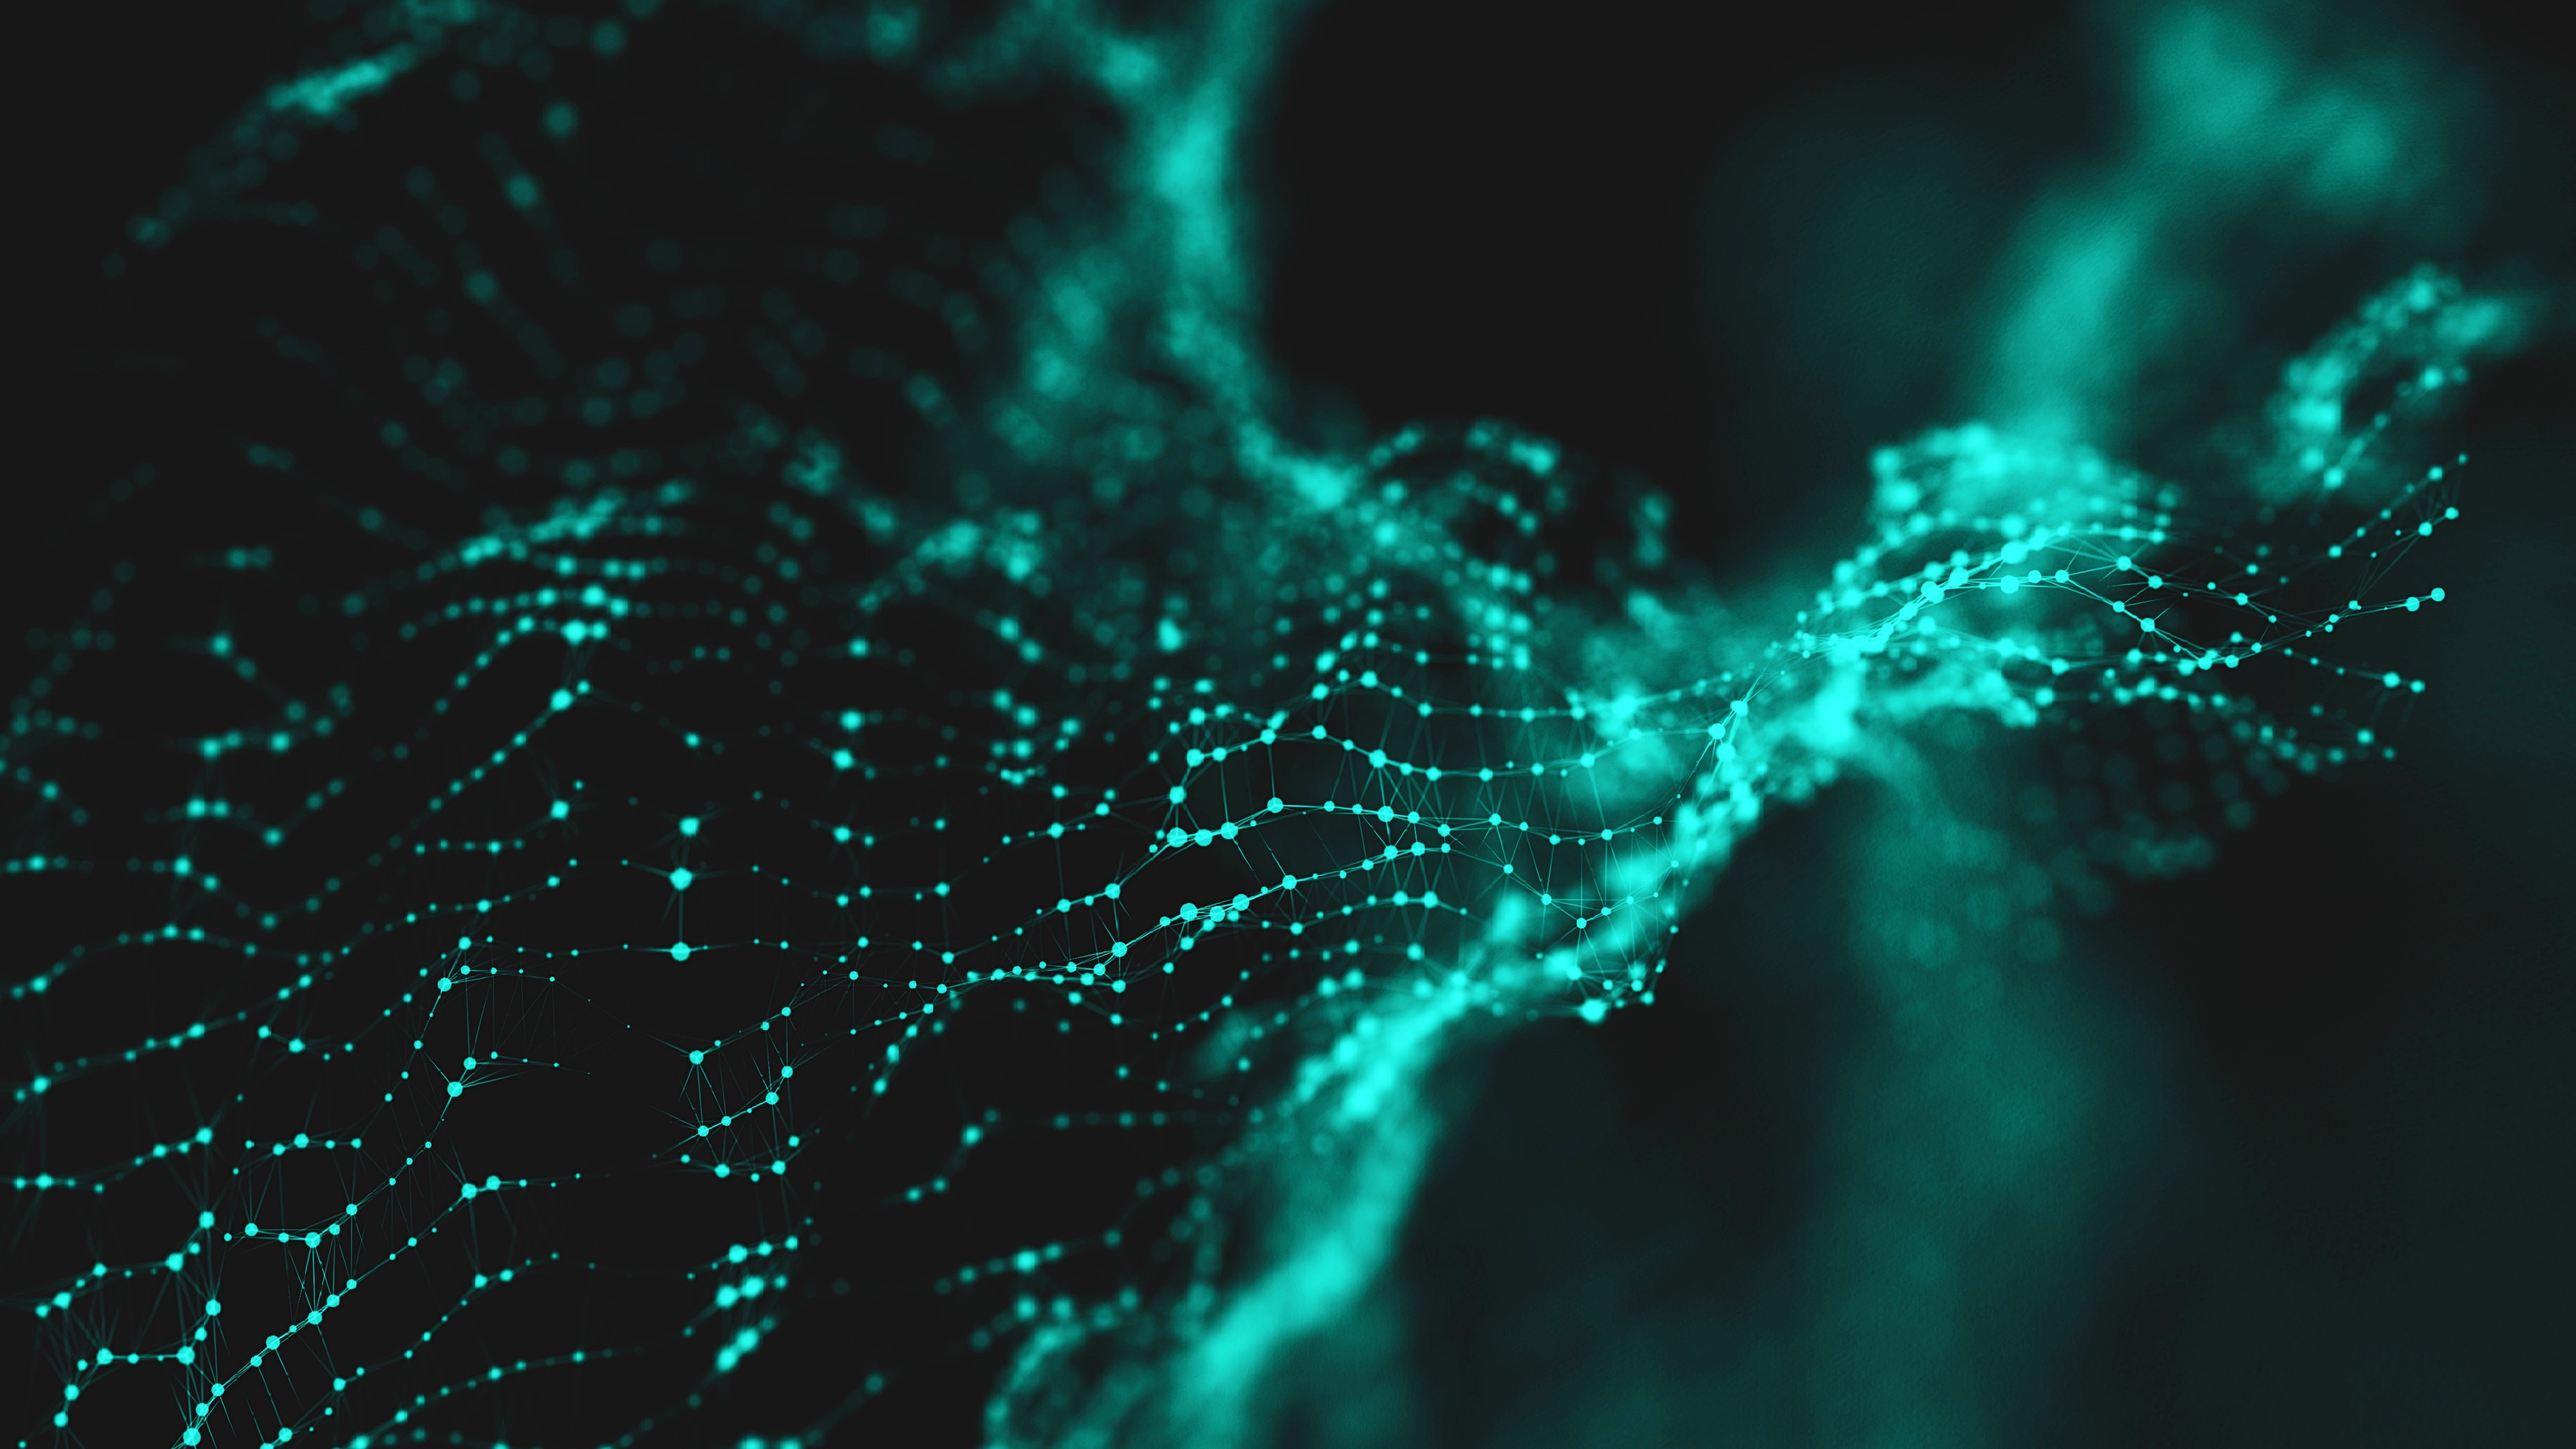 A digital abstract image featuring a network of interconnected glowing teal nodes on a dark background, resembling a wave or web structure.